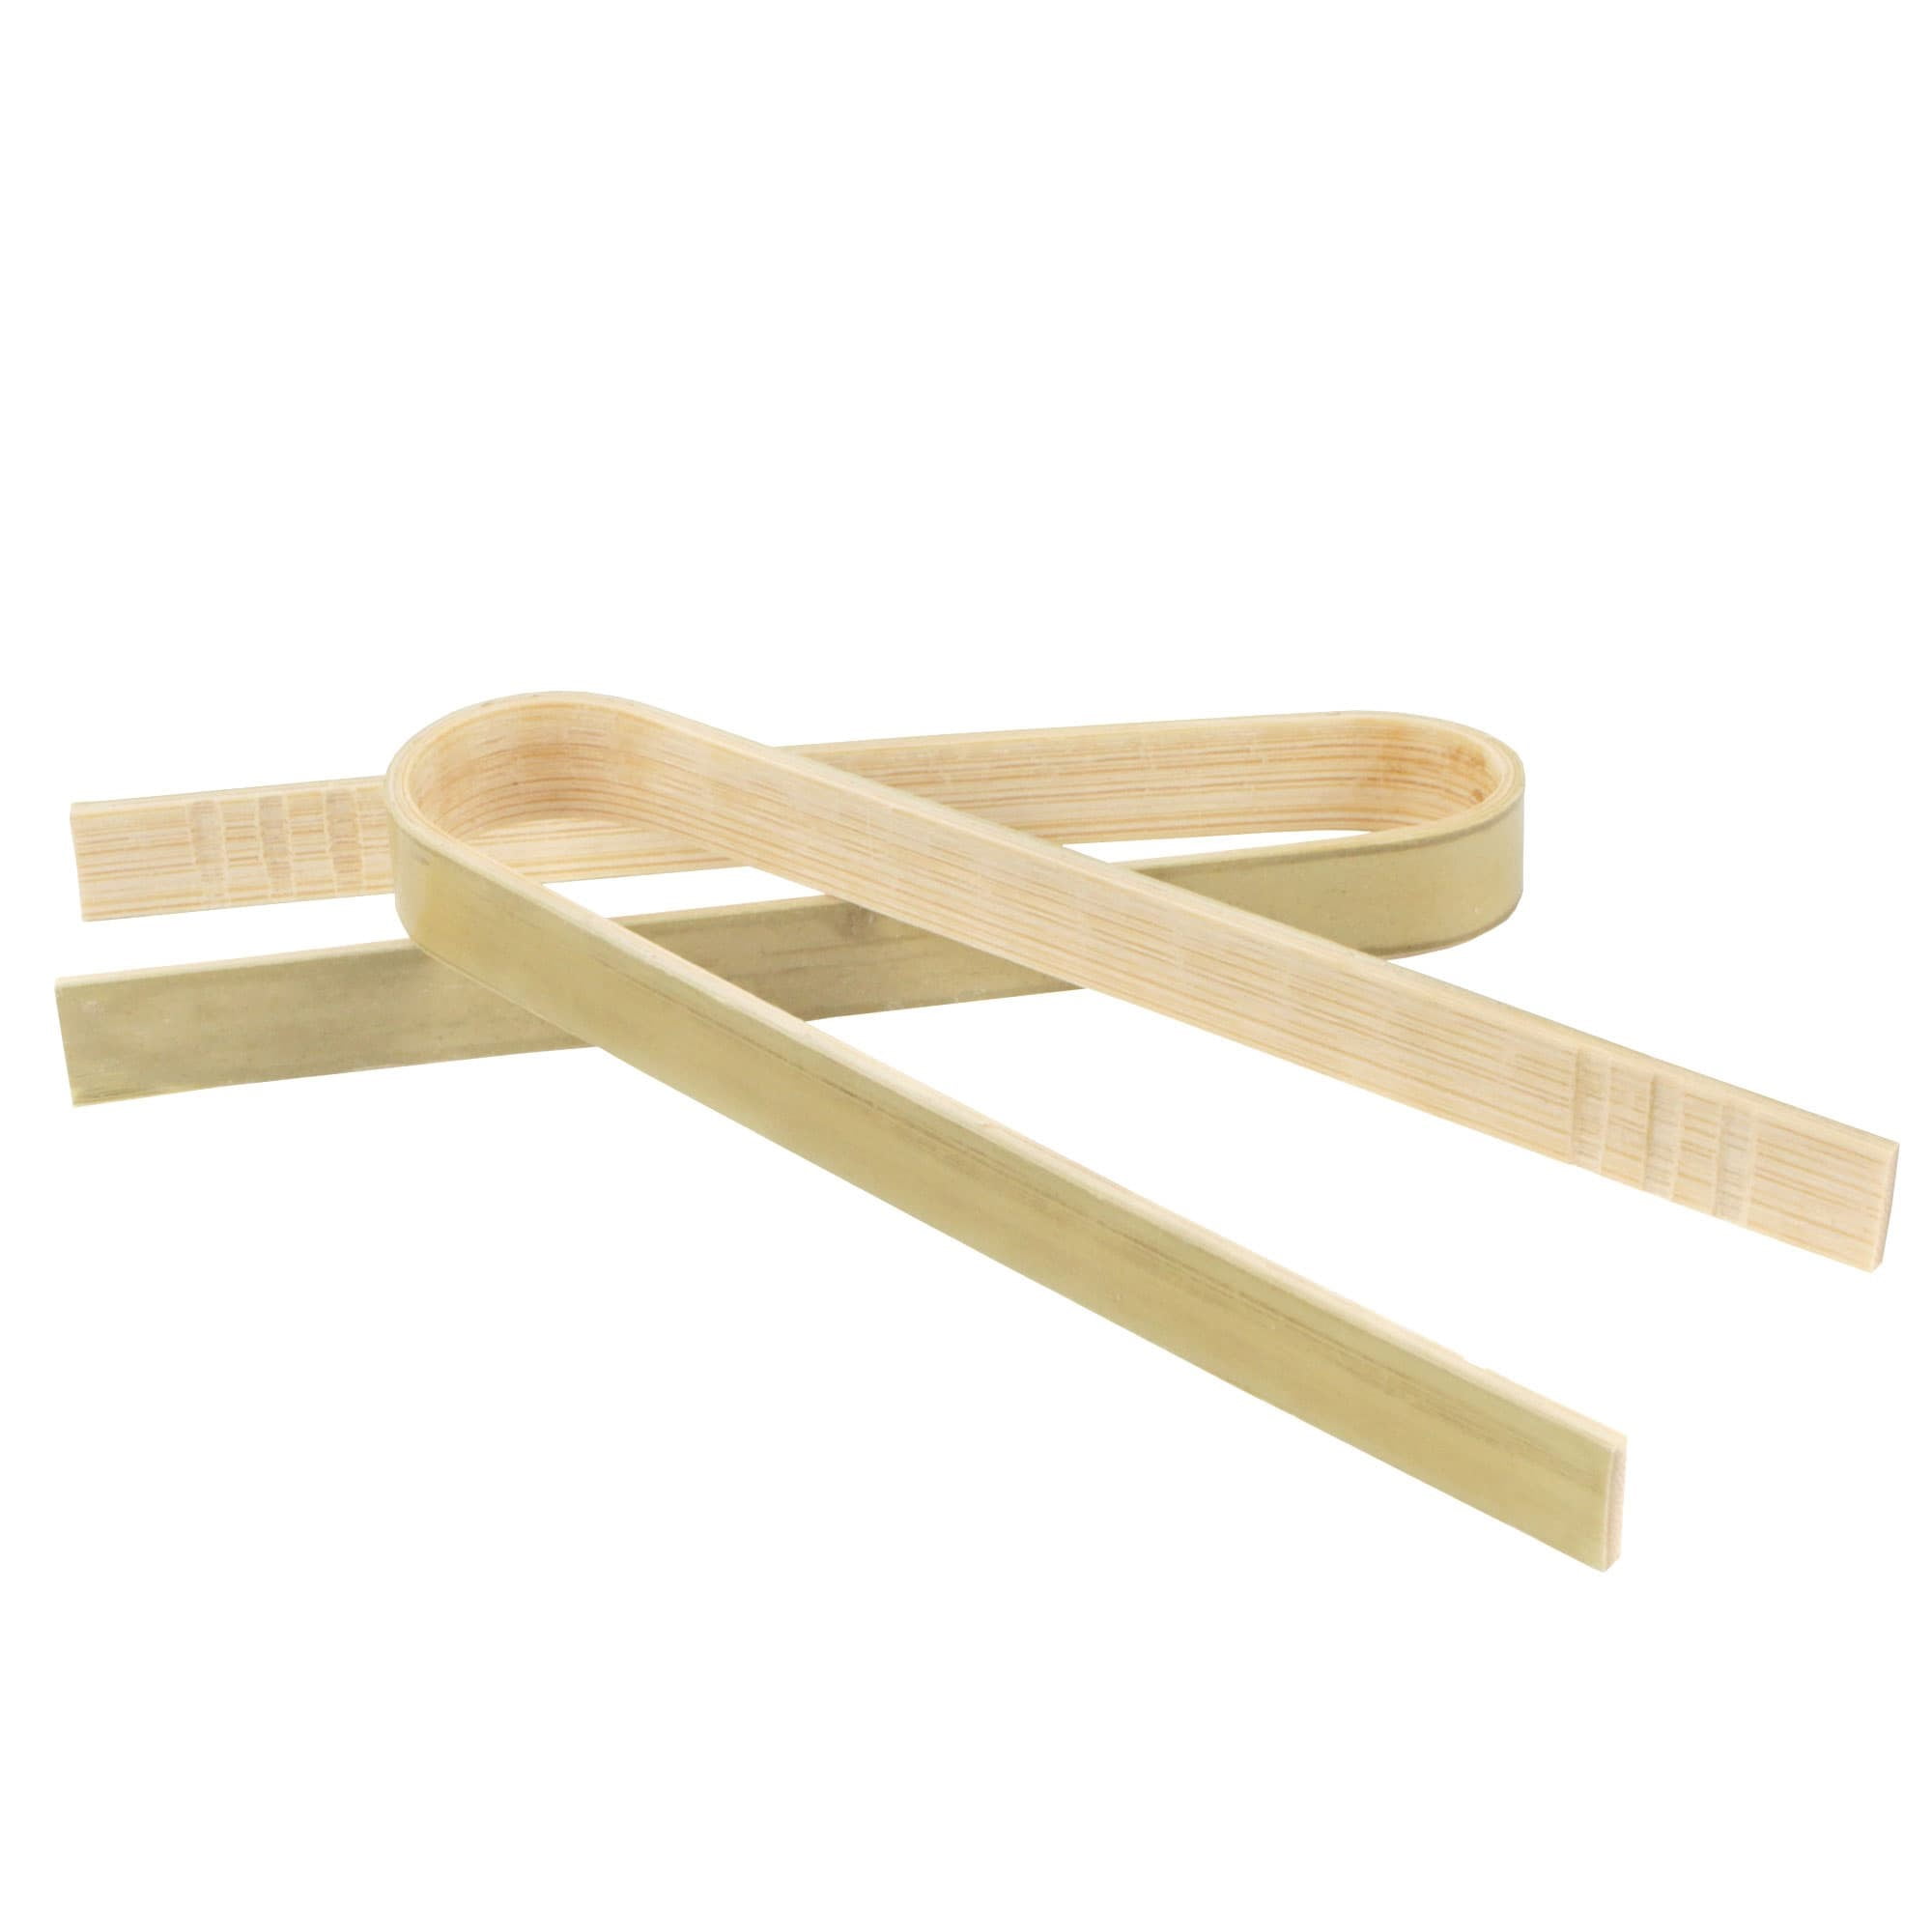 BambooMN Brand 10pcs 3.1 Small Solid Bamboo Deep Scoop 